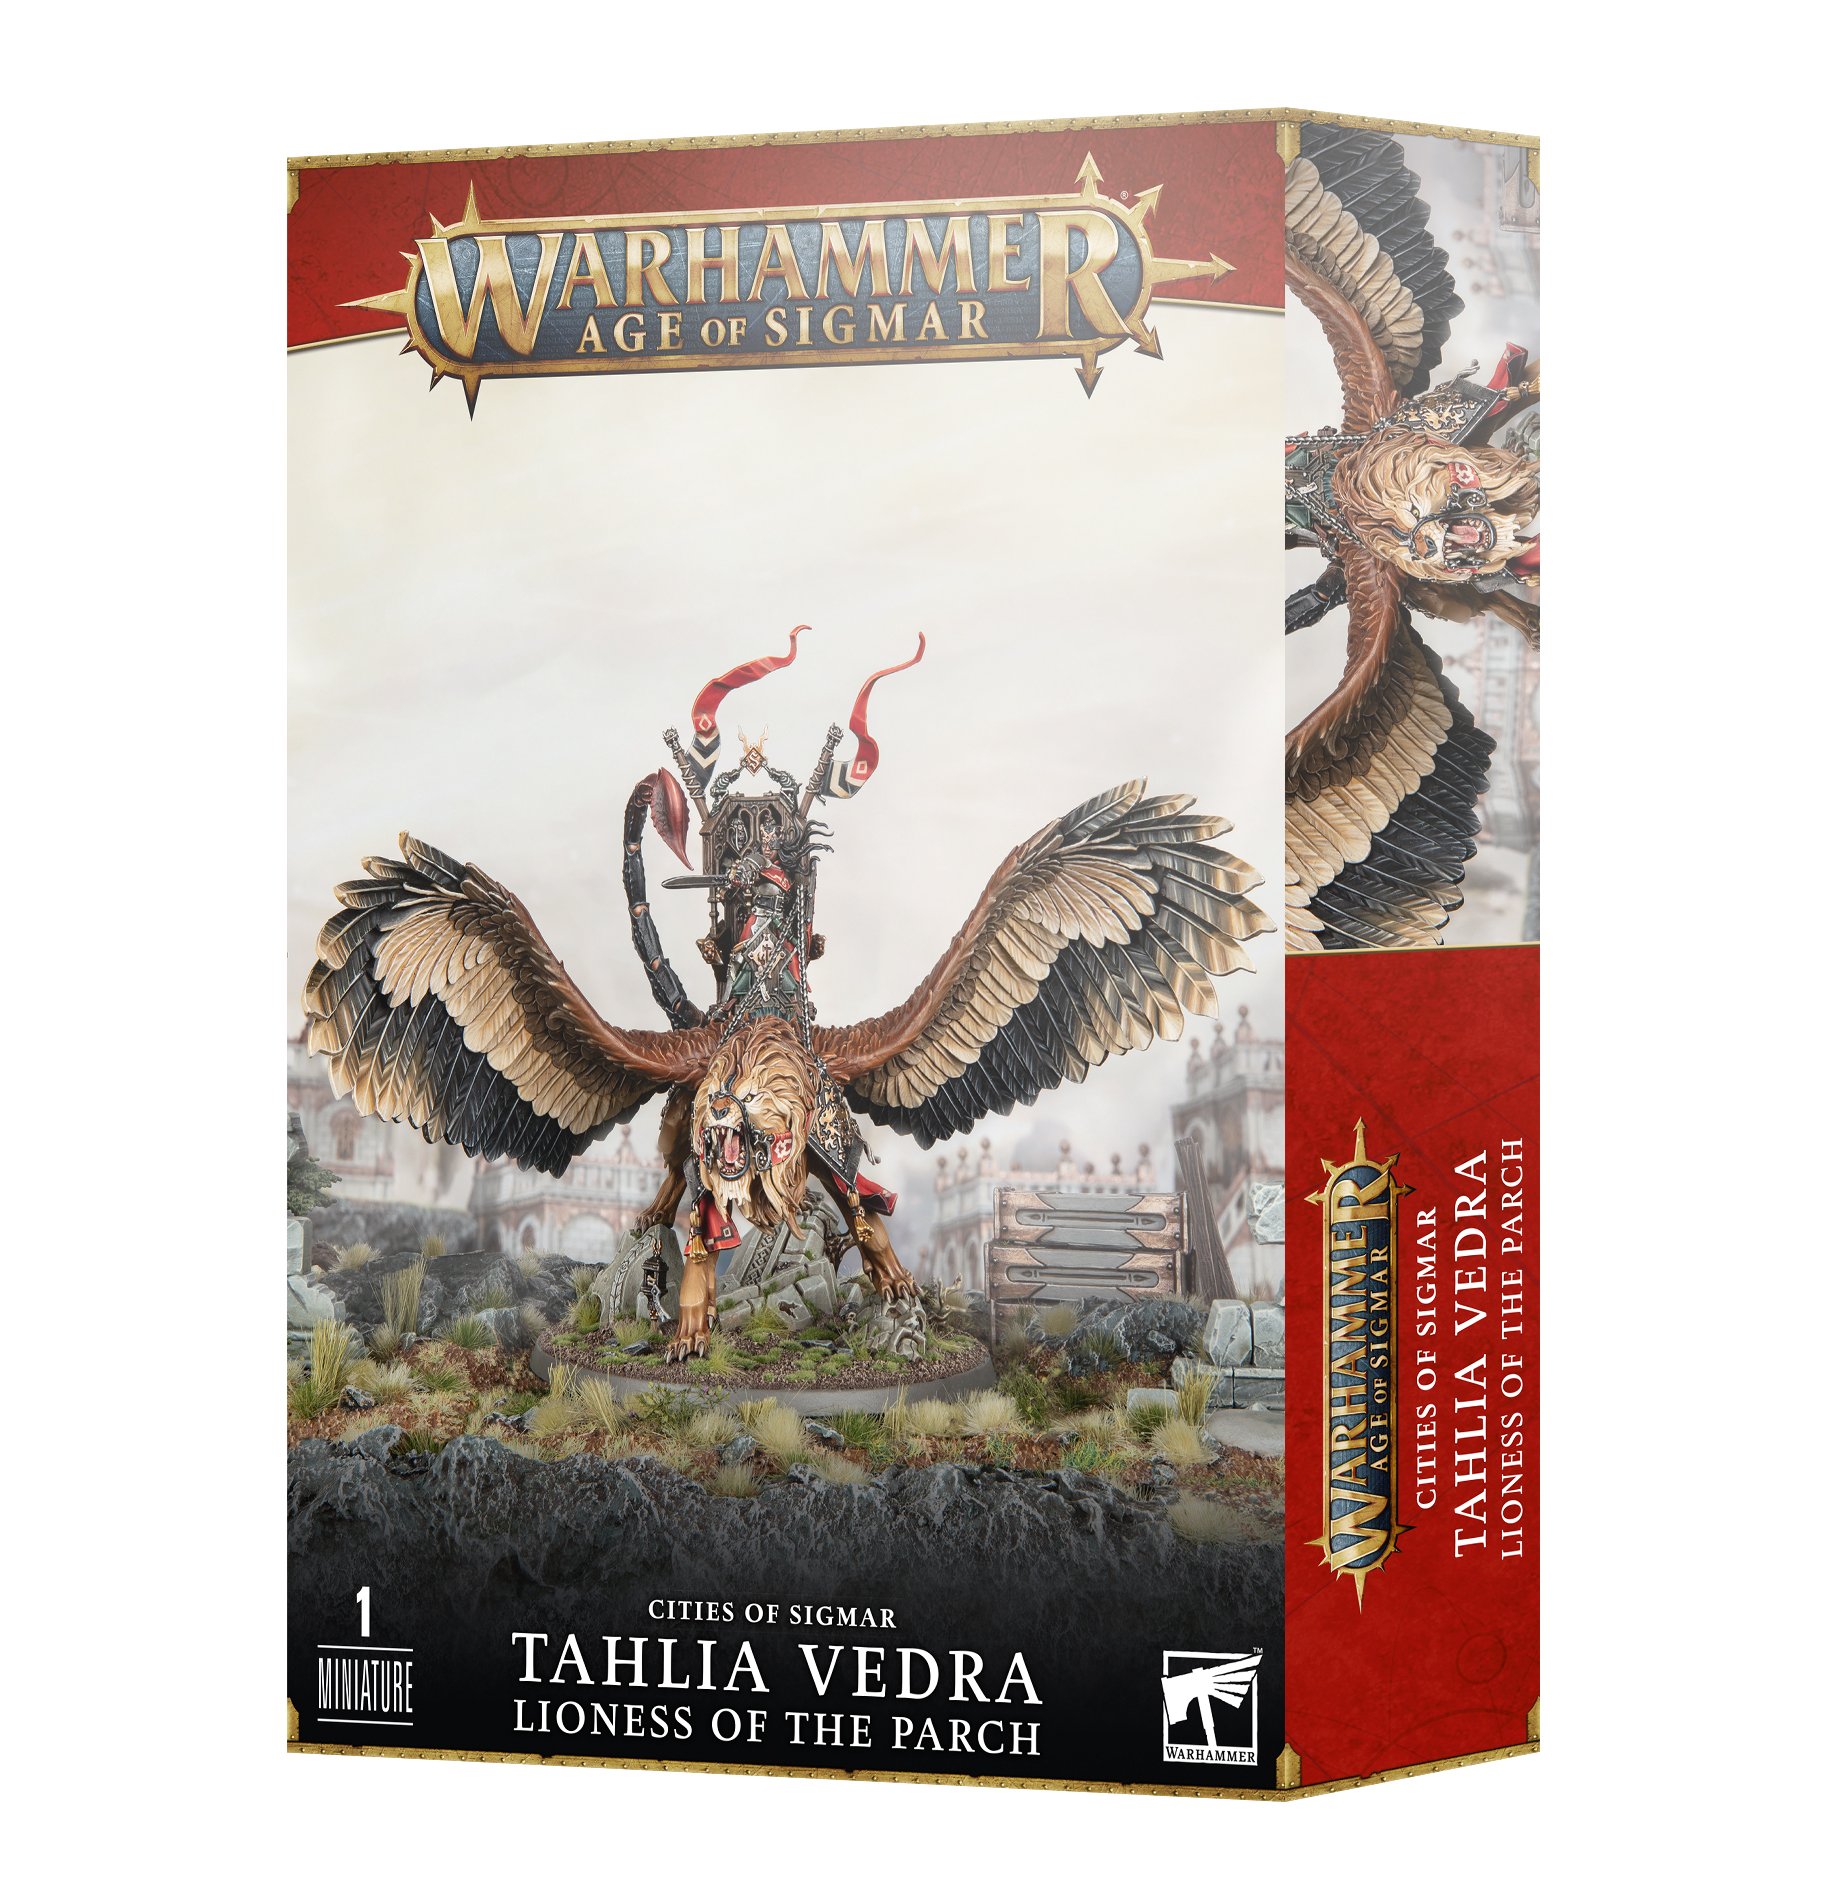 Warhammer Age of Sigmar: Cities of Sigmar: Tahlia Vedra: Lioness of the Parch 